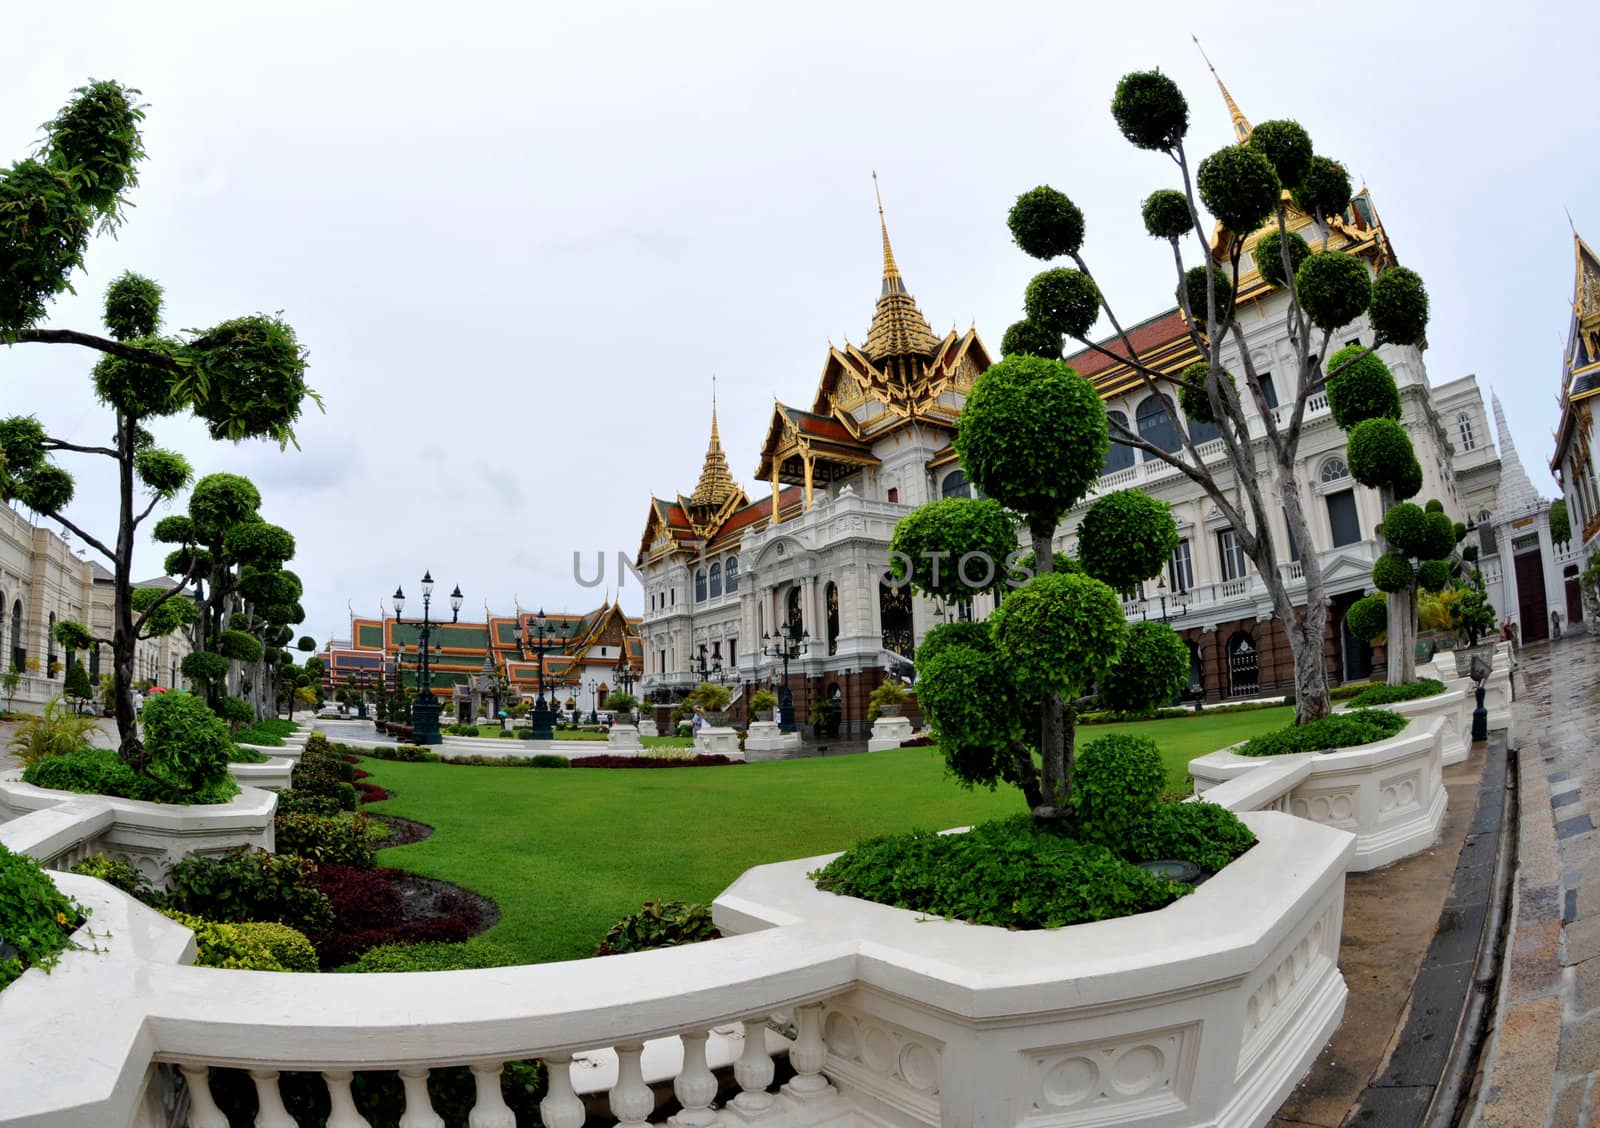 One of the main tourist attractions:The Grand Palace/Wat Phra Keo in Bangkok,Thailand by taboga